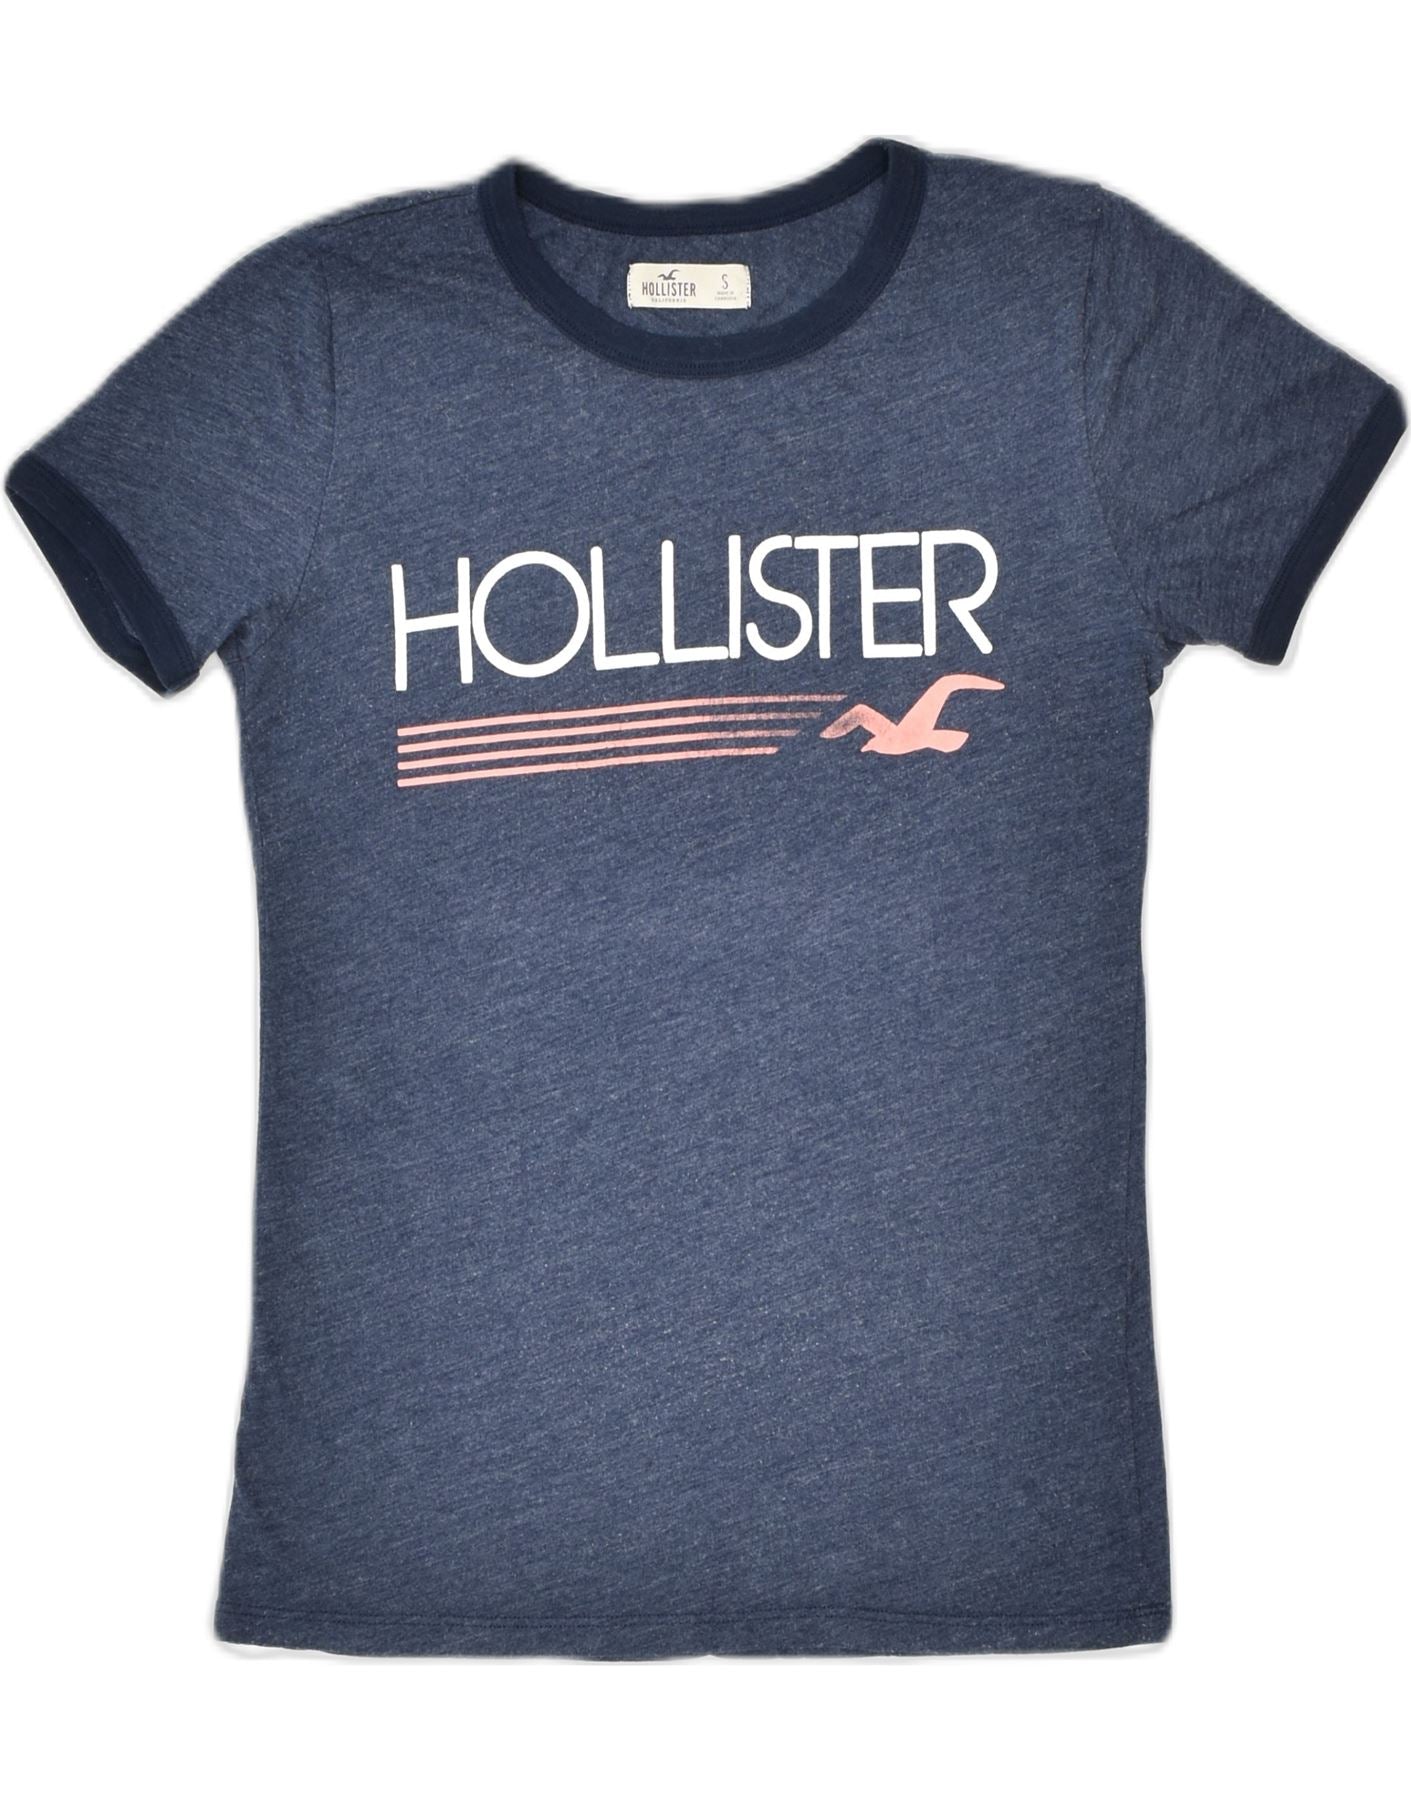 HOLLISTER Mens Graphic T-Shirt Top Small Blue Cotton Classic